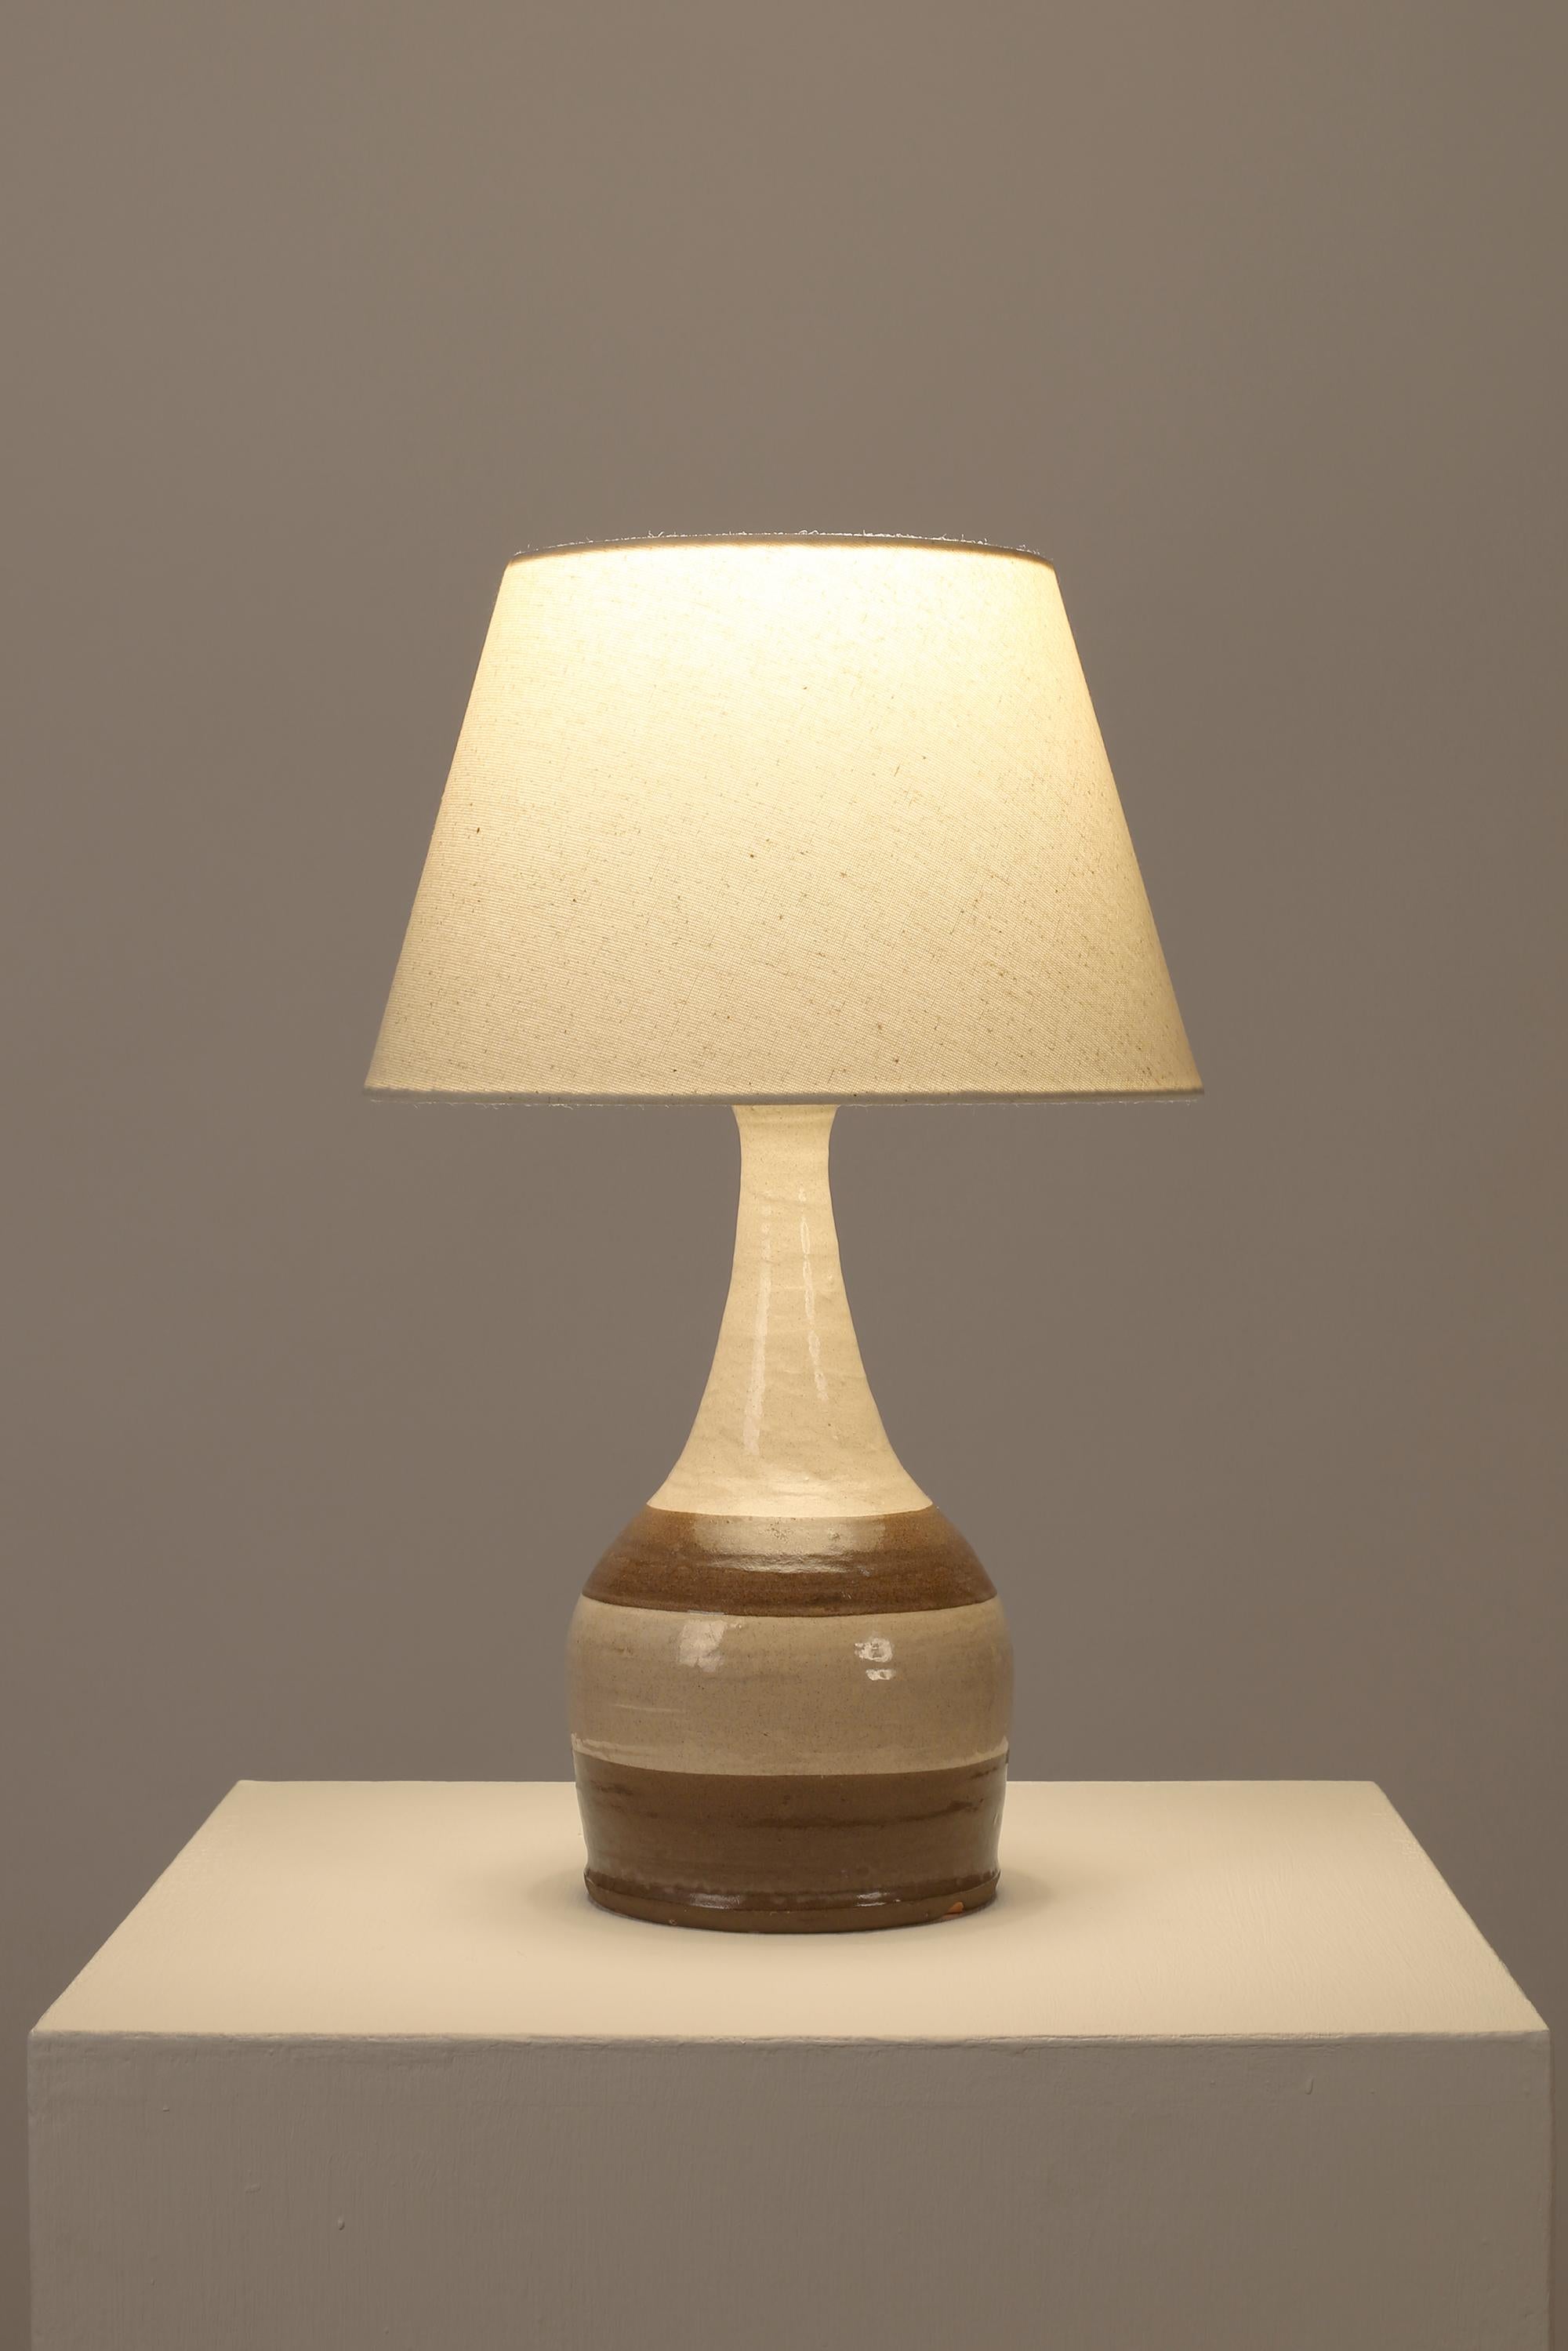 A terracotta table lamp of bottle-like form with speckled off-white and brown banded glaze, from the Poteries Du Marais - stamped. French, c. 1960s. Supplied with a tapered oatmeal fabric shade.